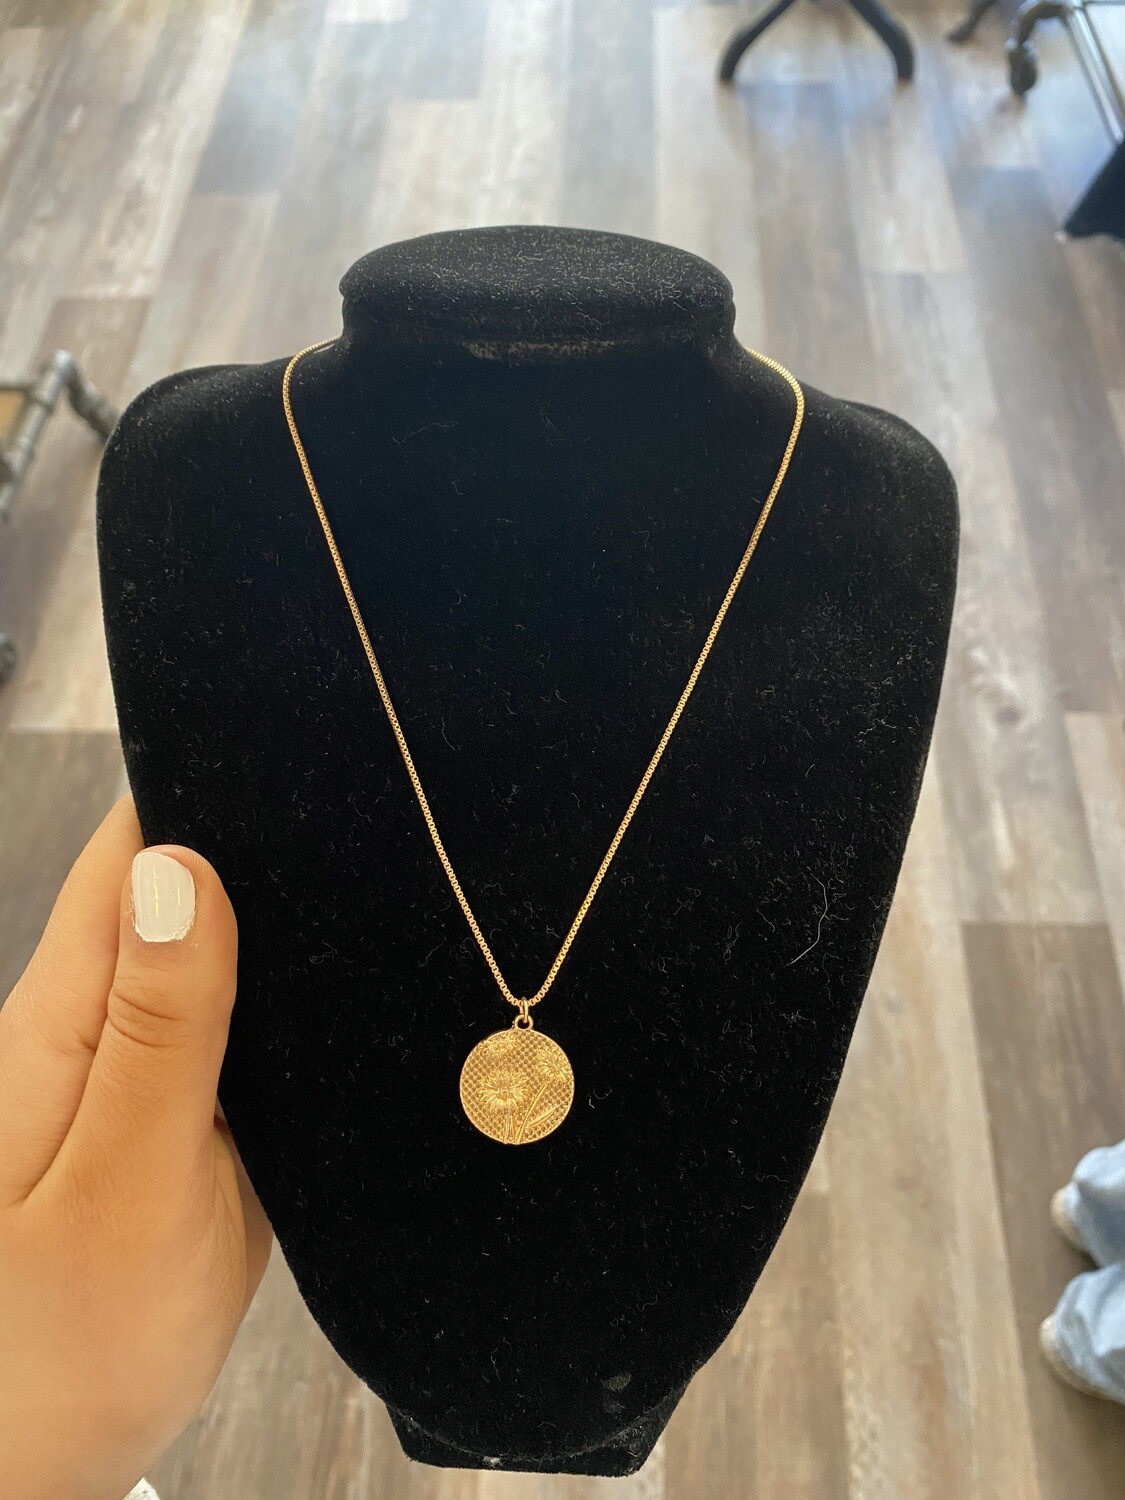 Circle Flower Necklace